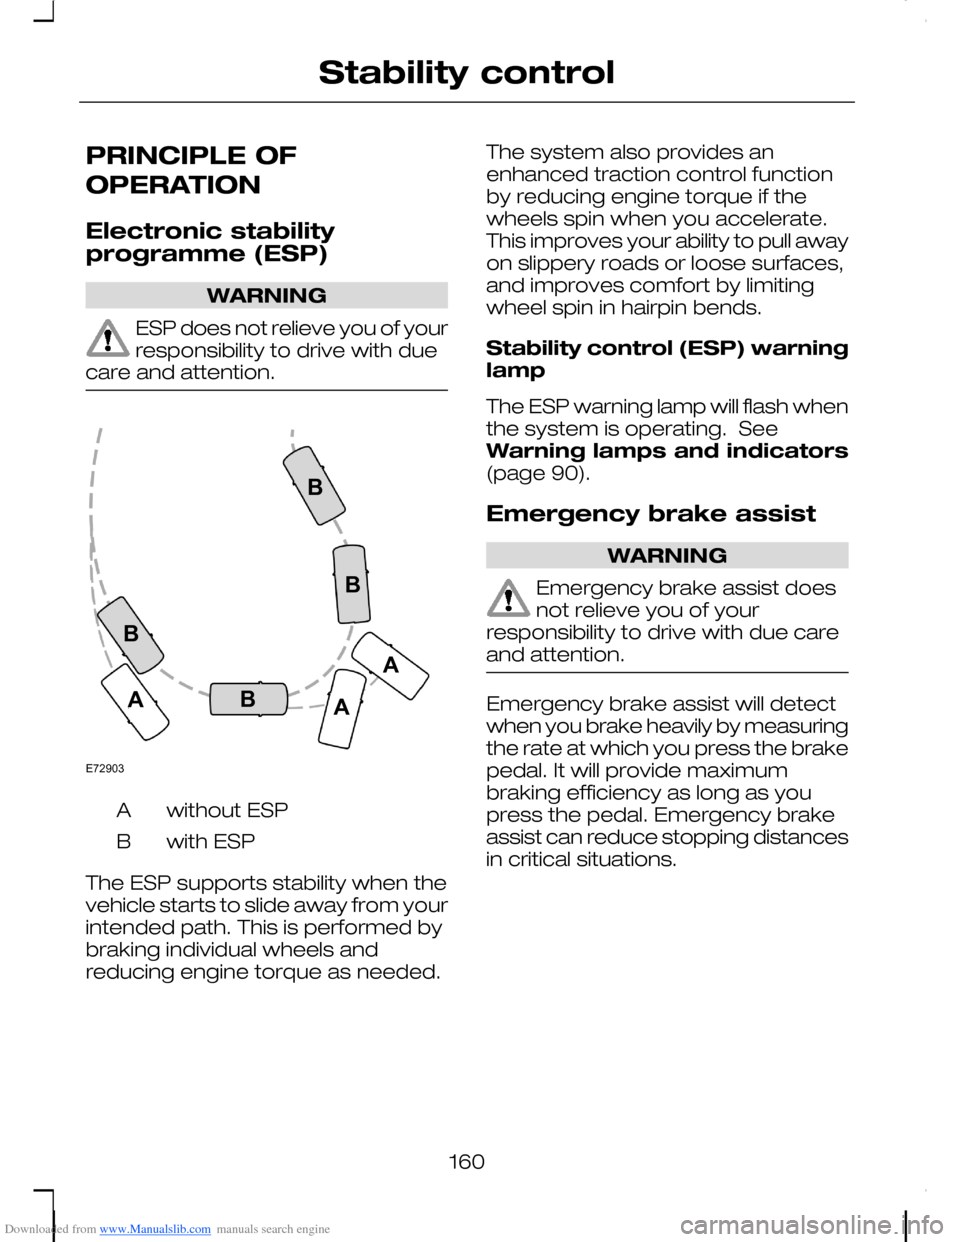 FORD C MAX 2008 1.G Owners Manual Downloaded from www.Manualslib.com manuals search engine PRINCIPLE OF
OPERATION
Electronic stabilityprogramme (ESP)
WARNING
ESP does not relieve you of yourresponsibility to drive with duecare and att